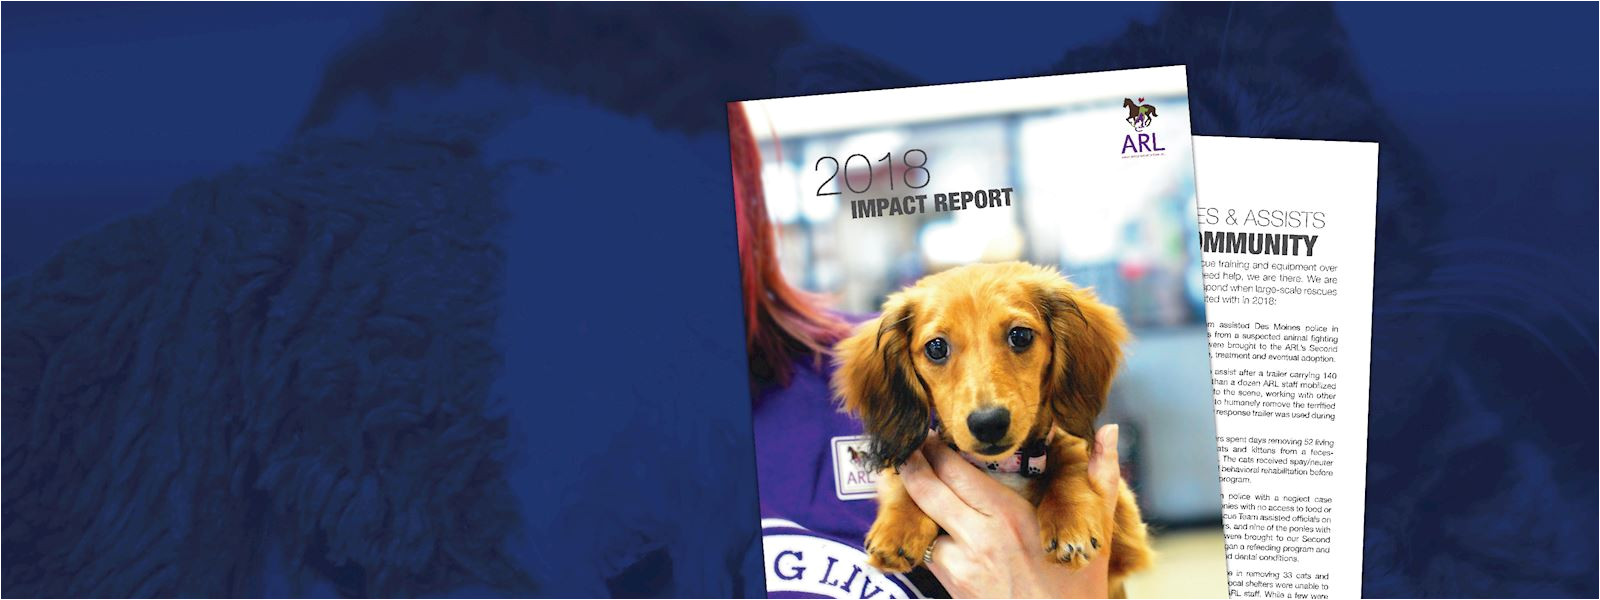 view the arl s 2018 impact report